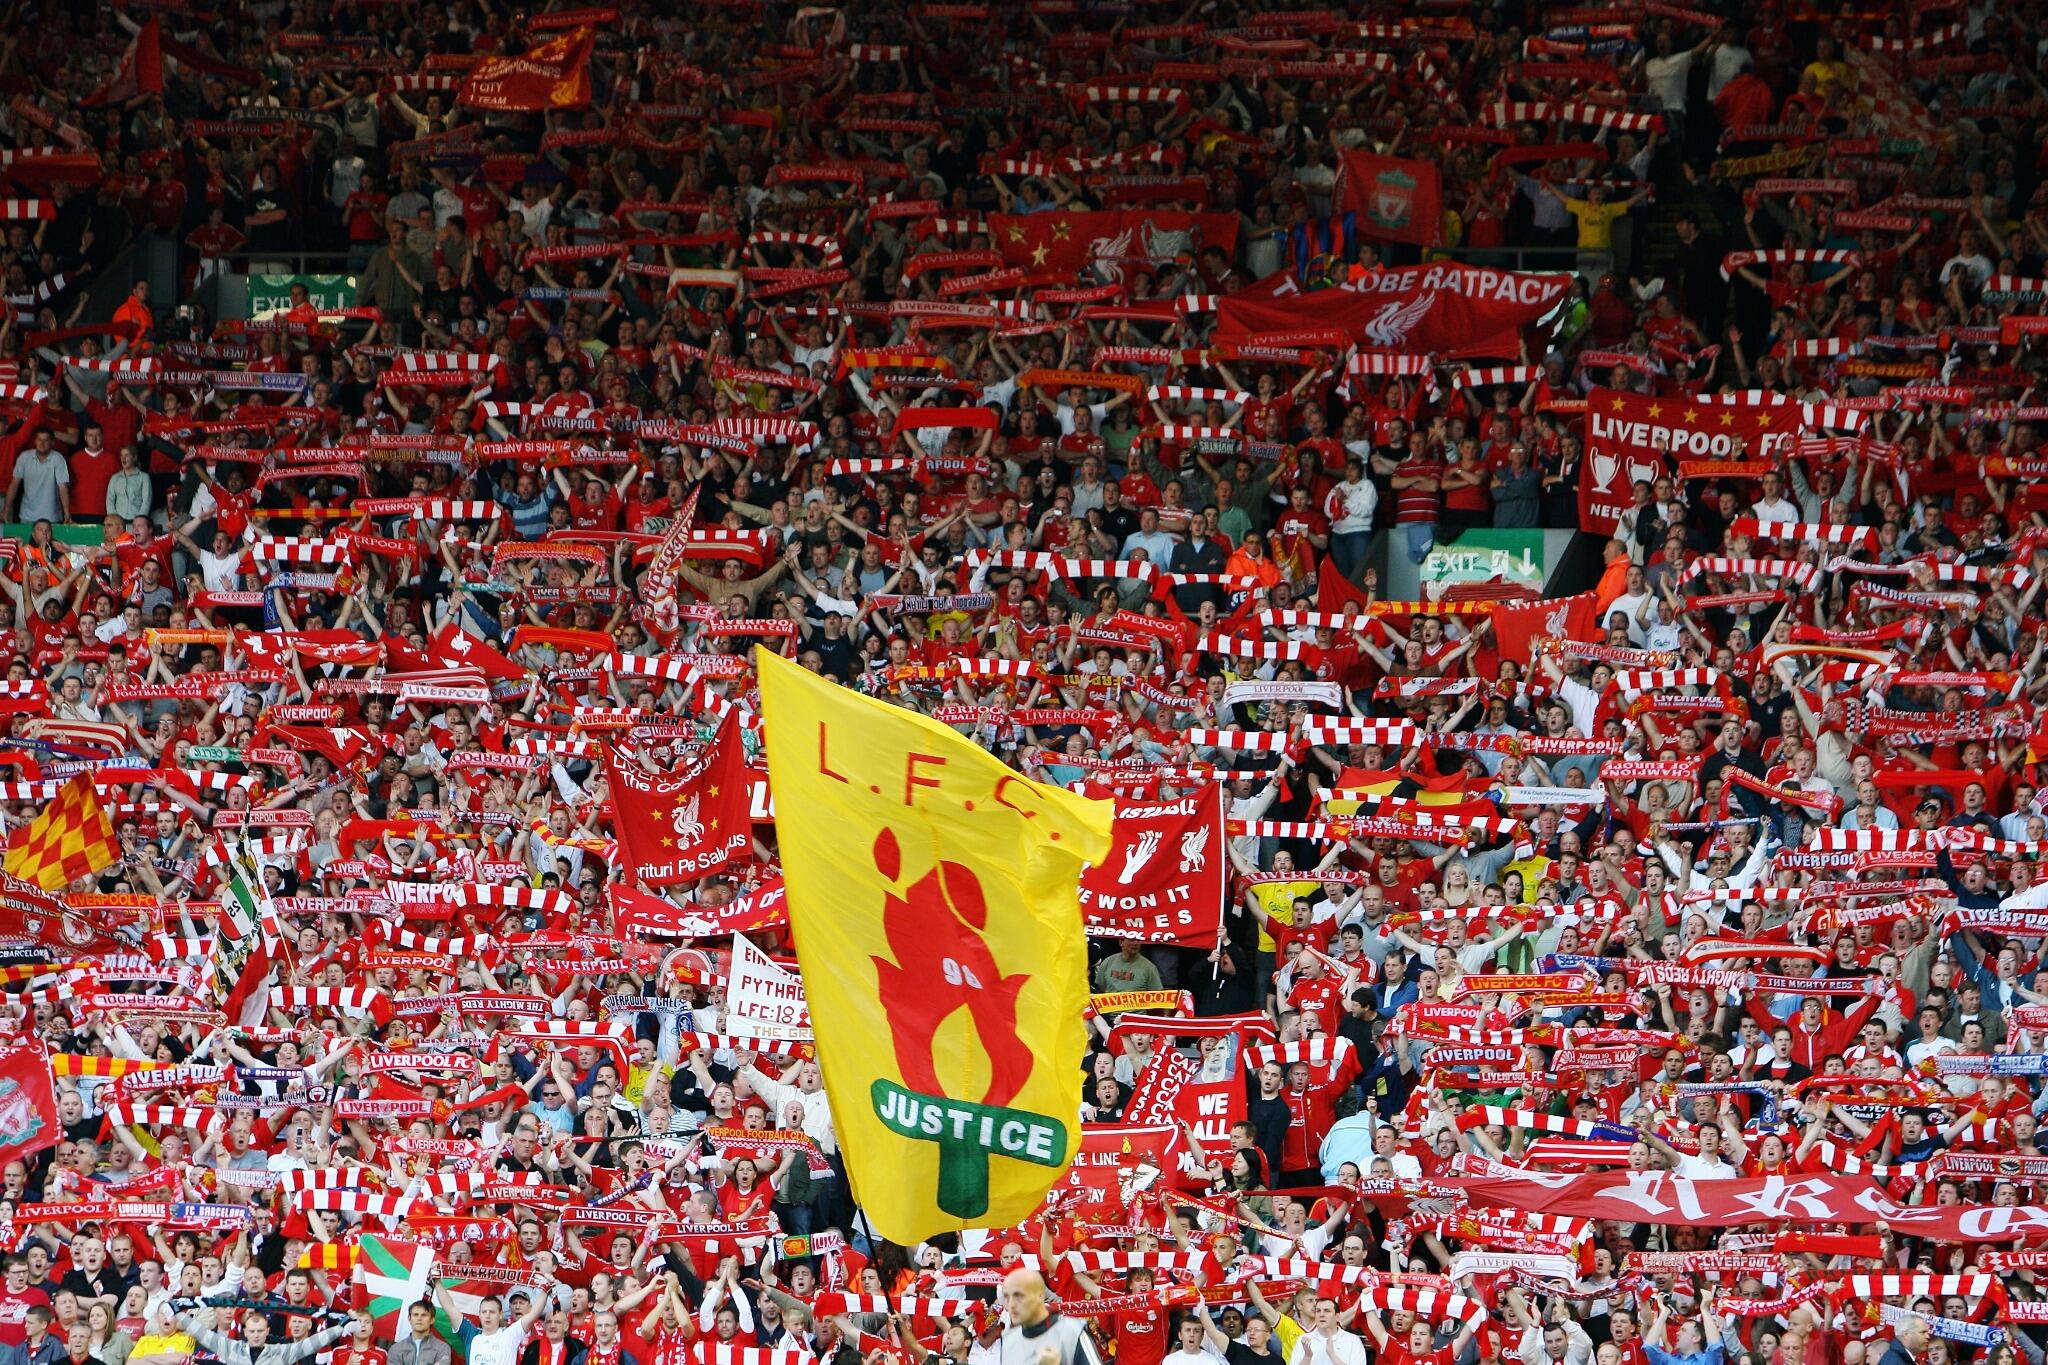 Liverpool Fc This Week S Kop 10 Countdown Looks At The Greatest Lfc Renditions Of You Ll Never Walk Alone Http T Co 6fneuptkrk Http T Co 5bb8drpfxk Twitter